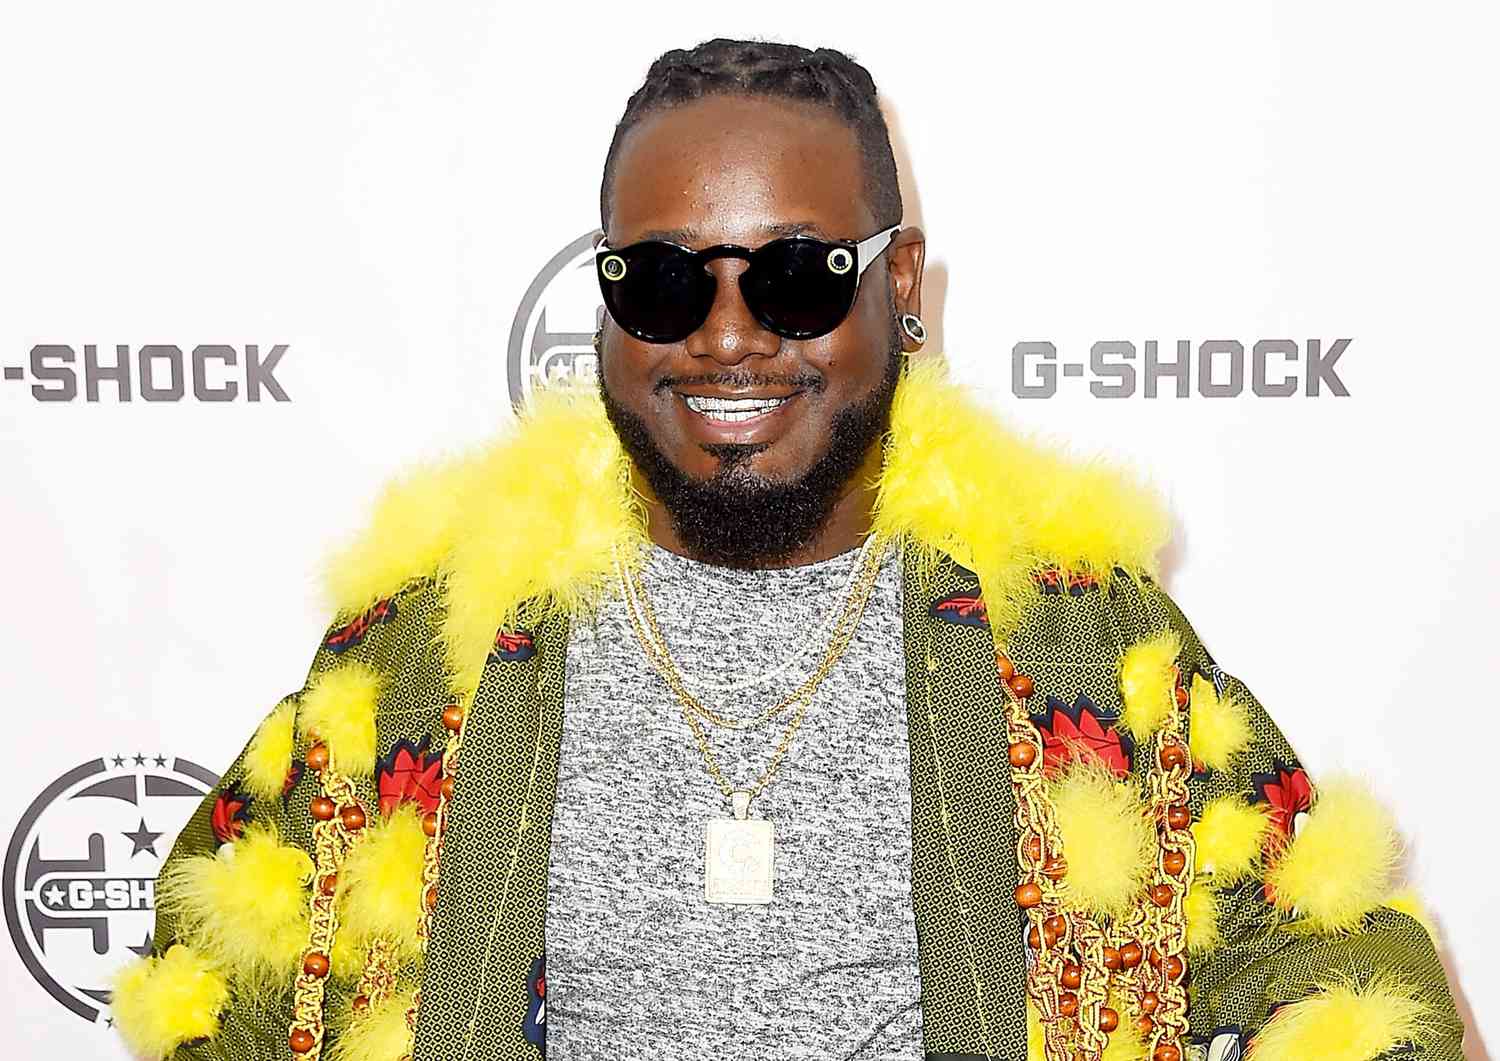 Why Was T Pain Called a Monster?